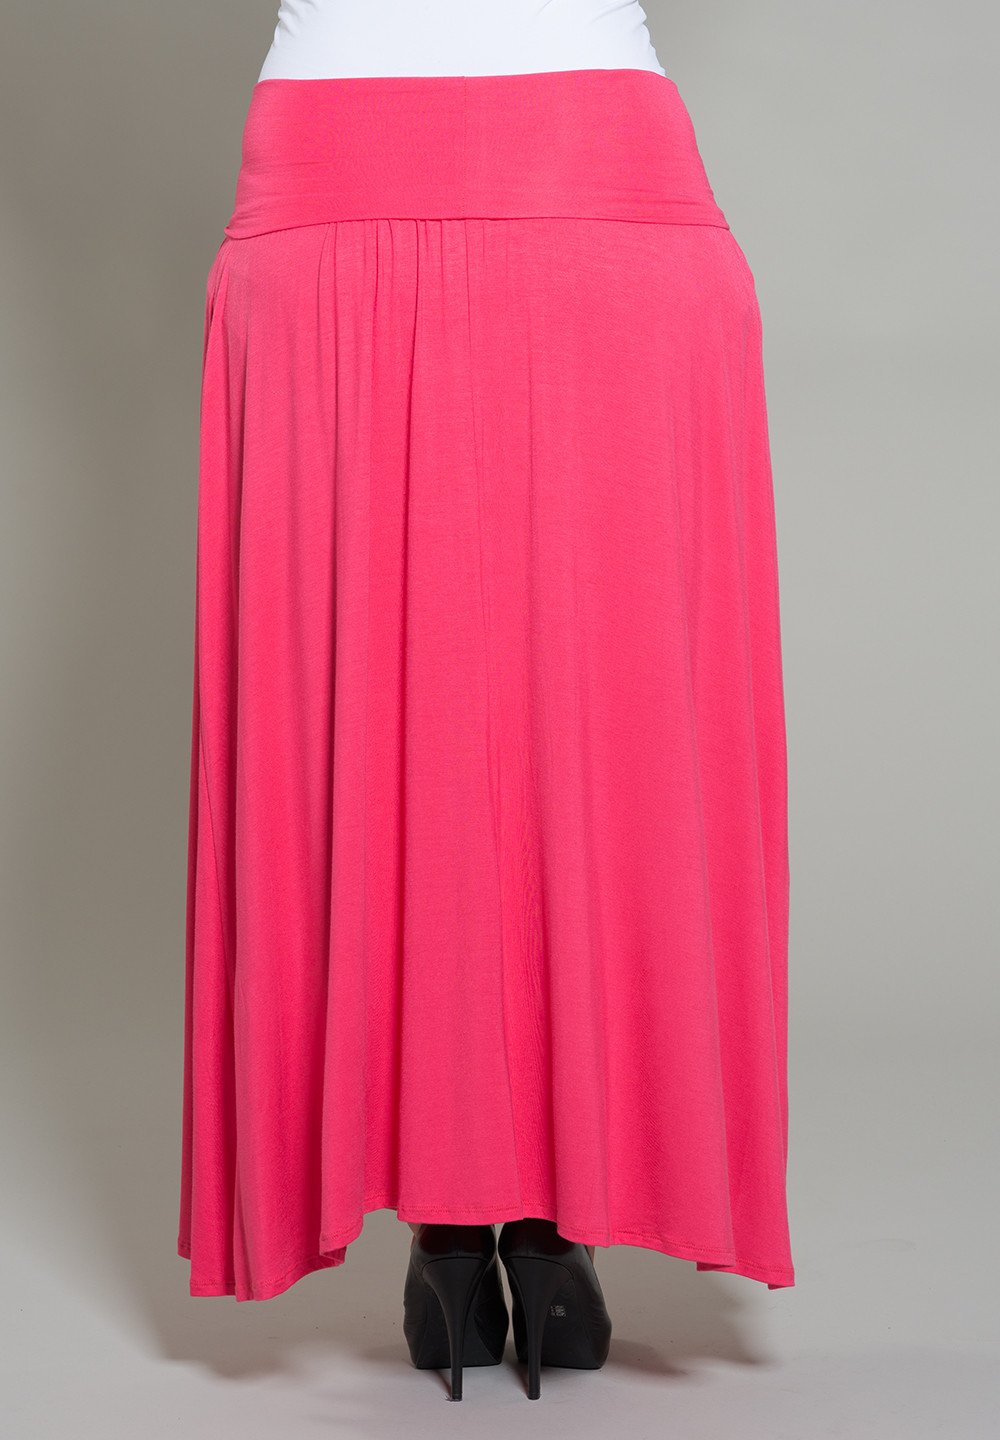 California Boho-Chic Maxi Skirt in Pink - Plus Size